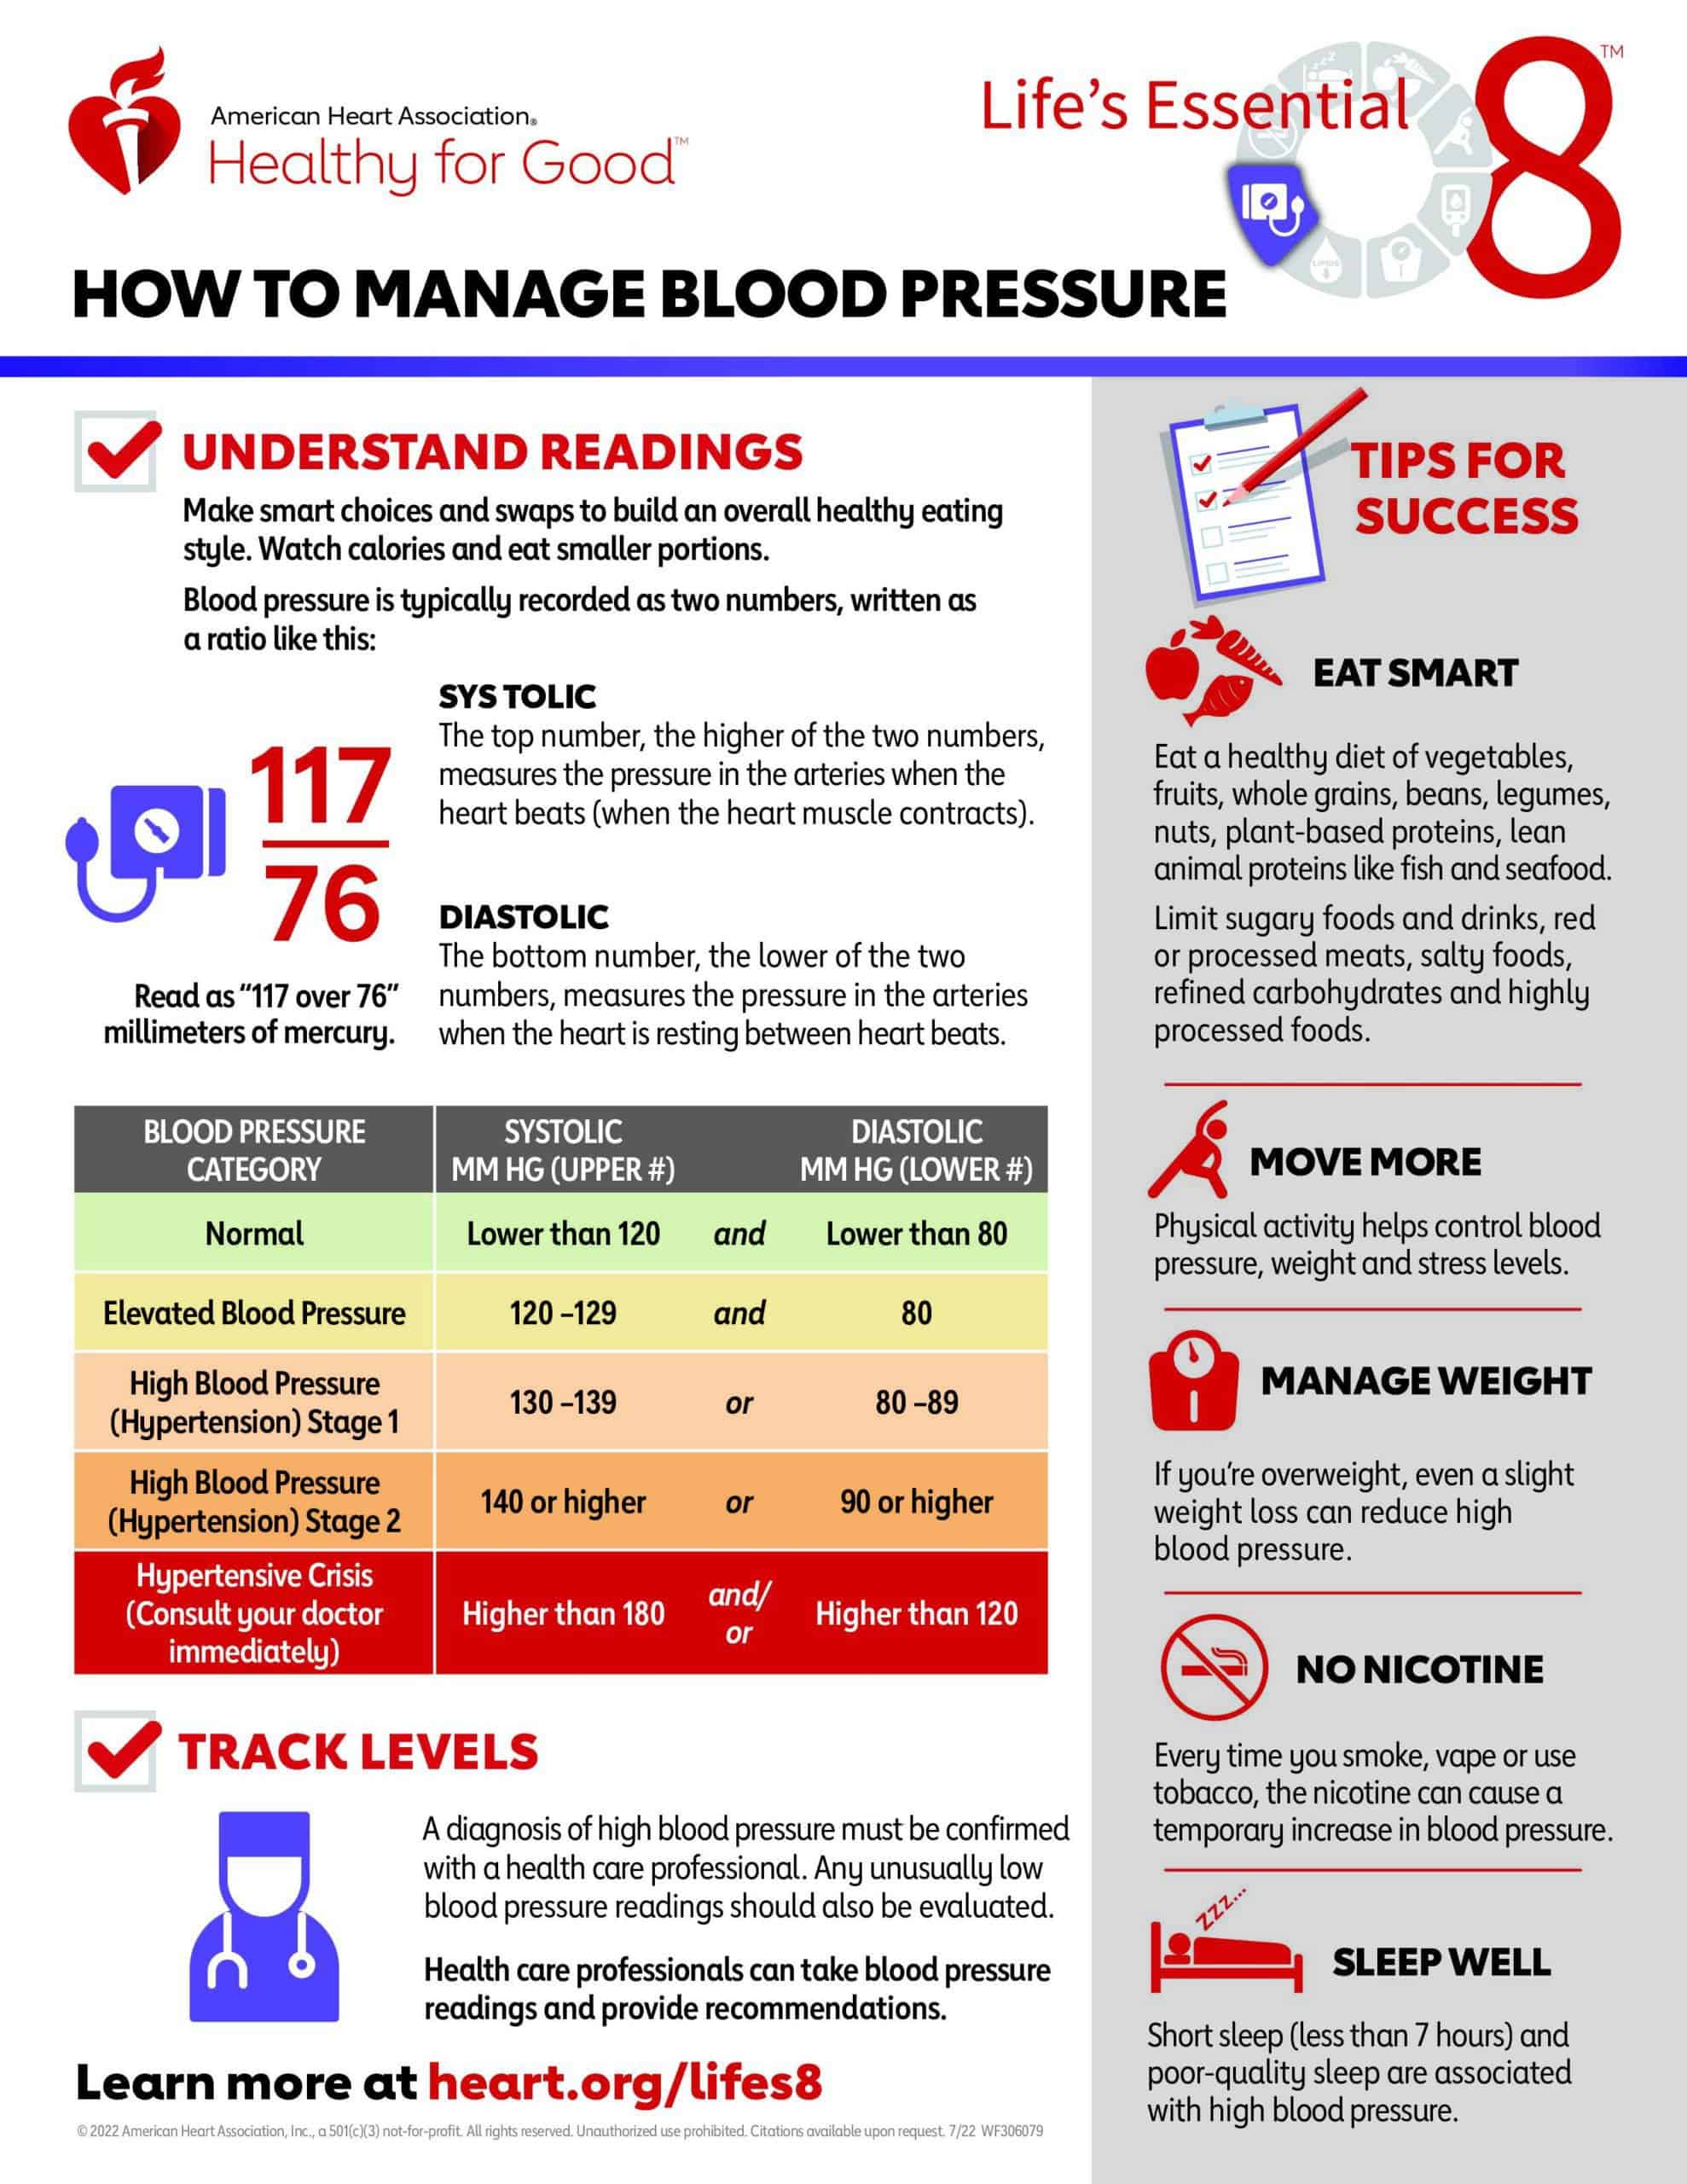 Manage blood pressure - Dr. Axe